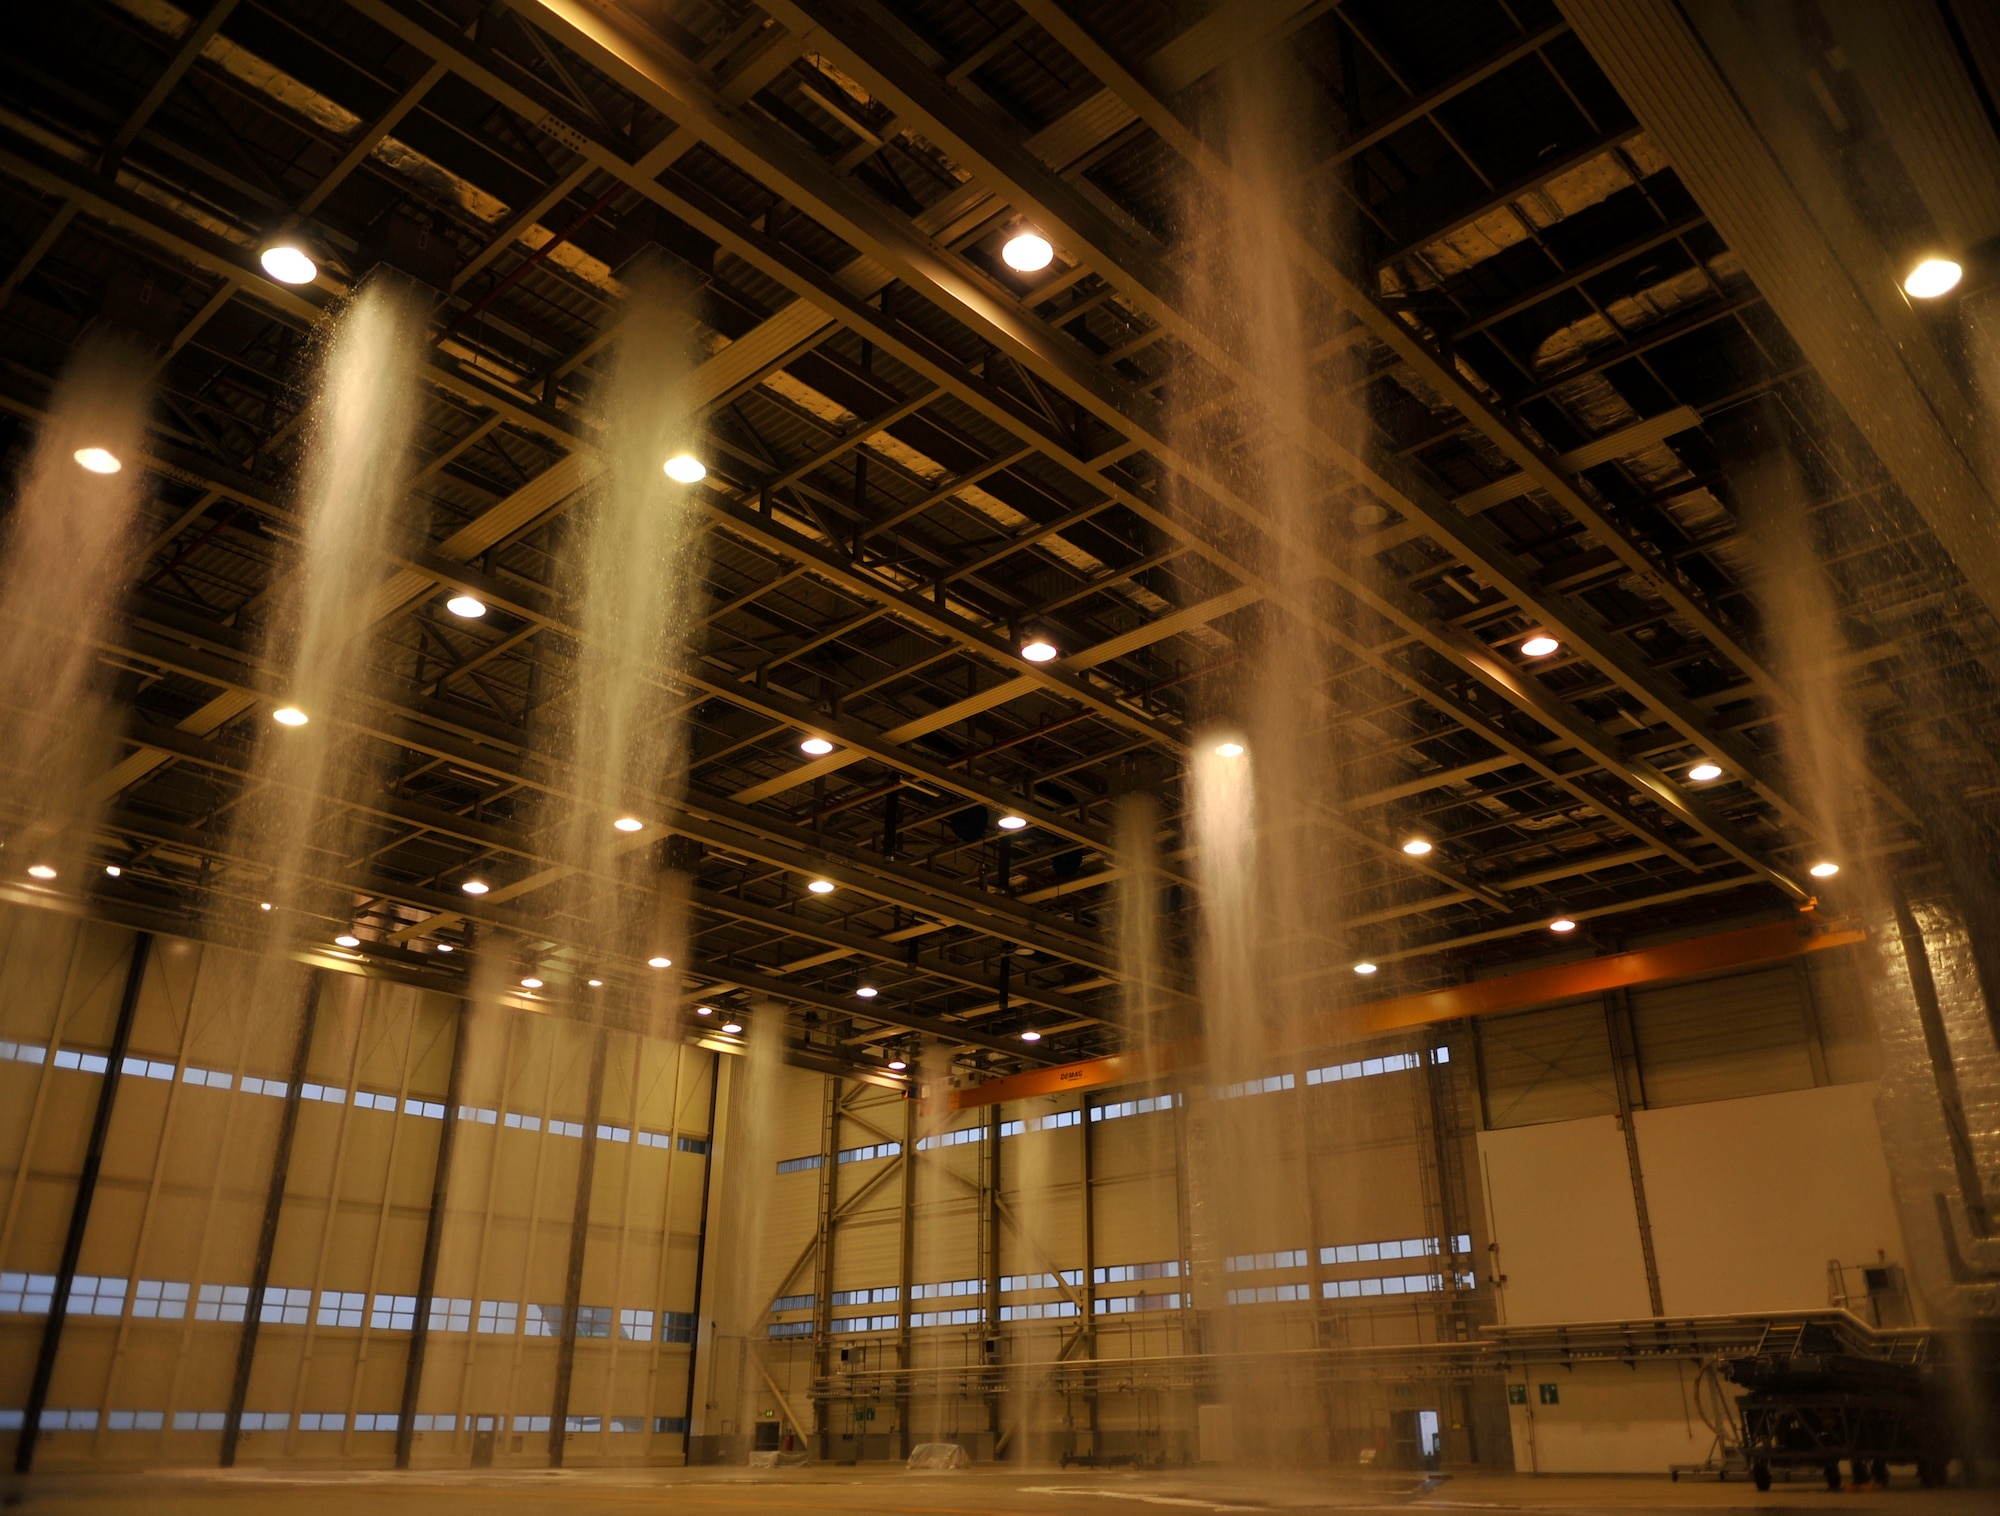 Water is emitted through foam generators during a biennial fire suppression system test, Feb. 19, 2015 at Ramstein Air Base, Germany. There are two water storage tanks, each of which takes approximately 26 minutes to empty and run through the drainage system. (U.S. Air Force photo/Airman 1st Class Larissa Greatwood)